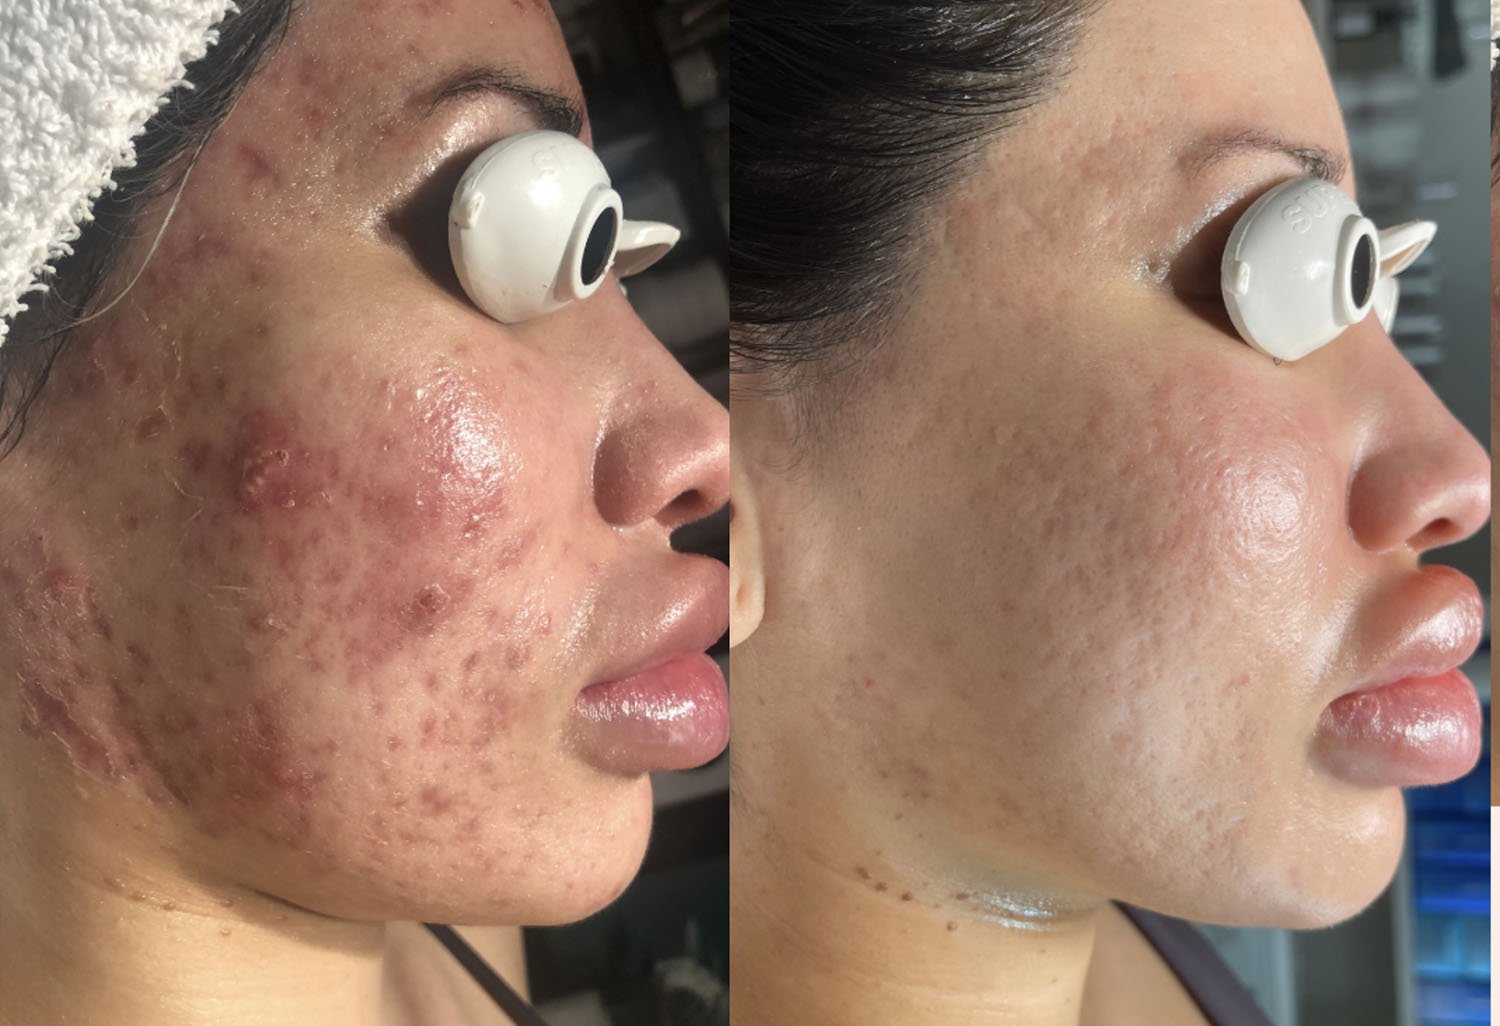 ACNE, INFLAMMATION, SCARRING